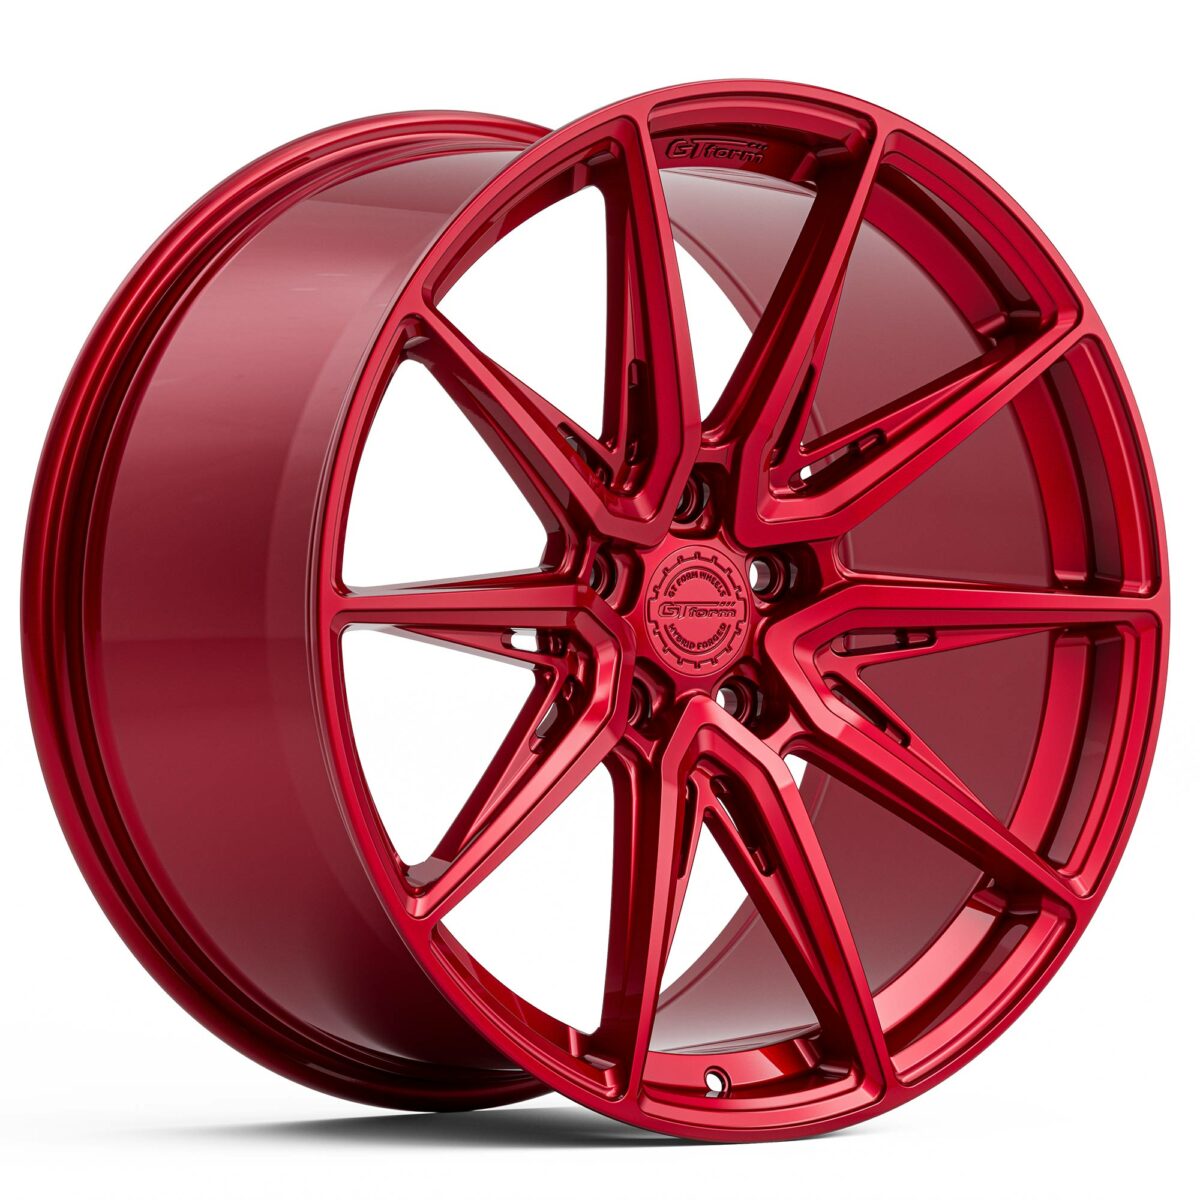 PERFORMANCE WHEELS GT FORM HF4.1 HYBRID FORGED ILLUSION RED 20X9 20X10.5 20X12 STAGGERED RIMS